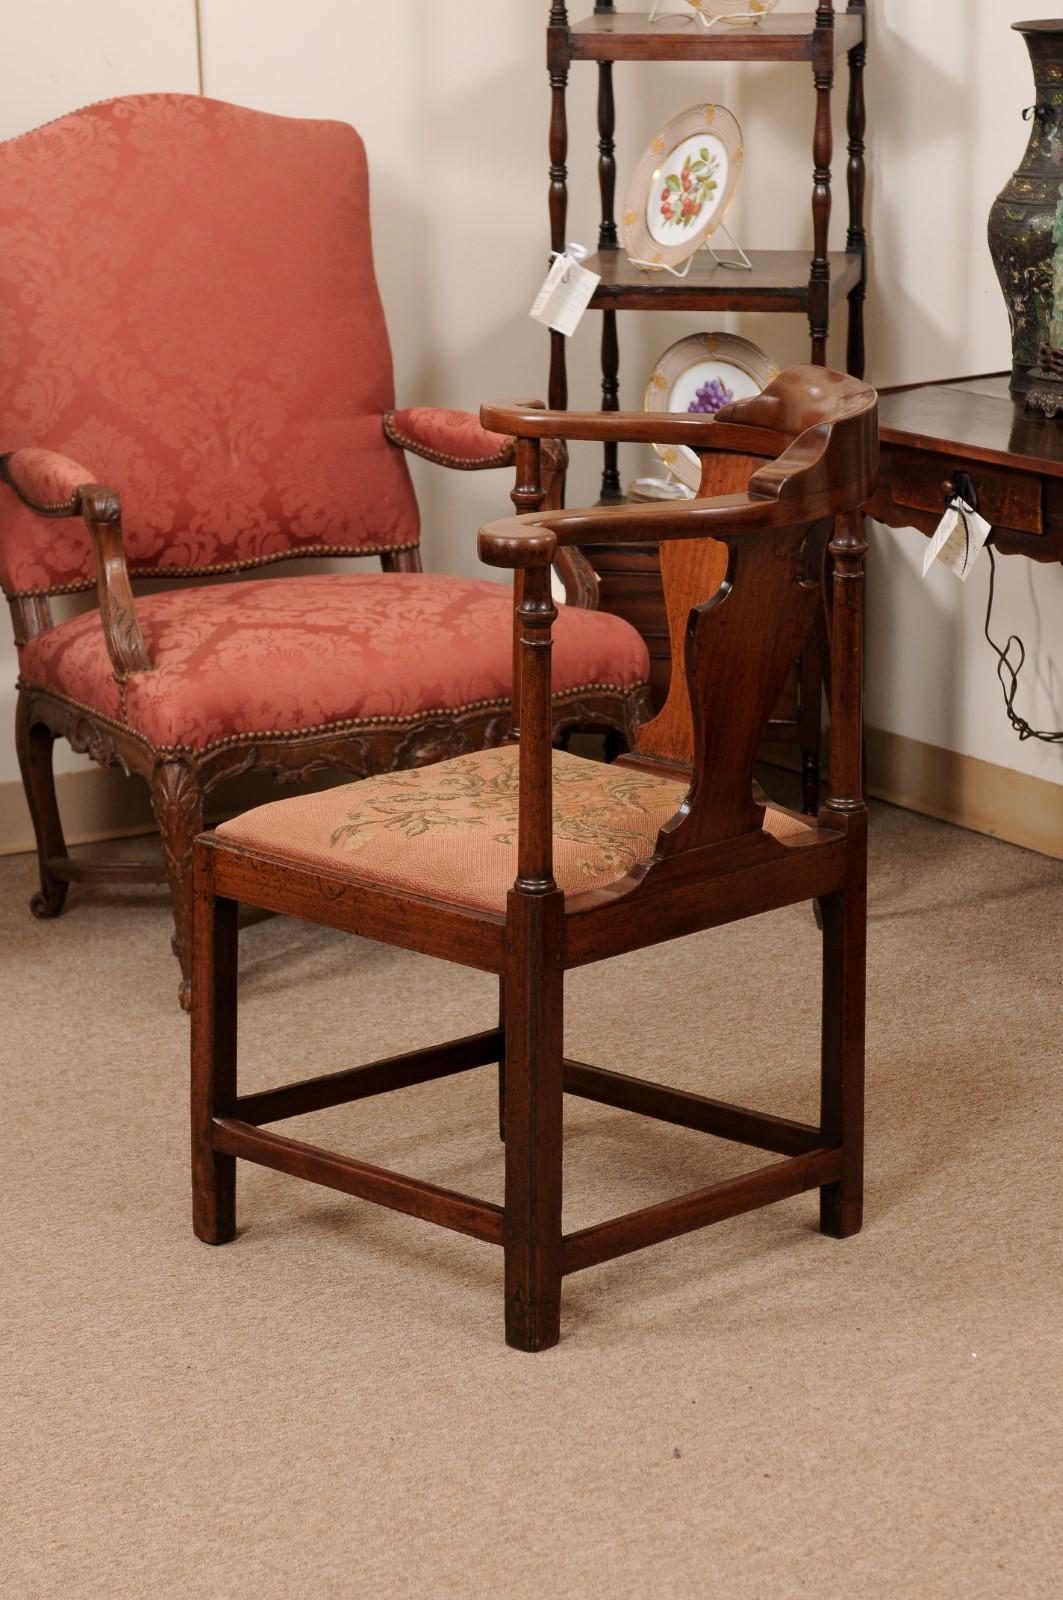 18th Century English Mahogany Corner Chair with Rounded Back, Slip Seat & Box Stretcher